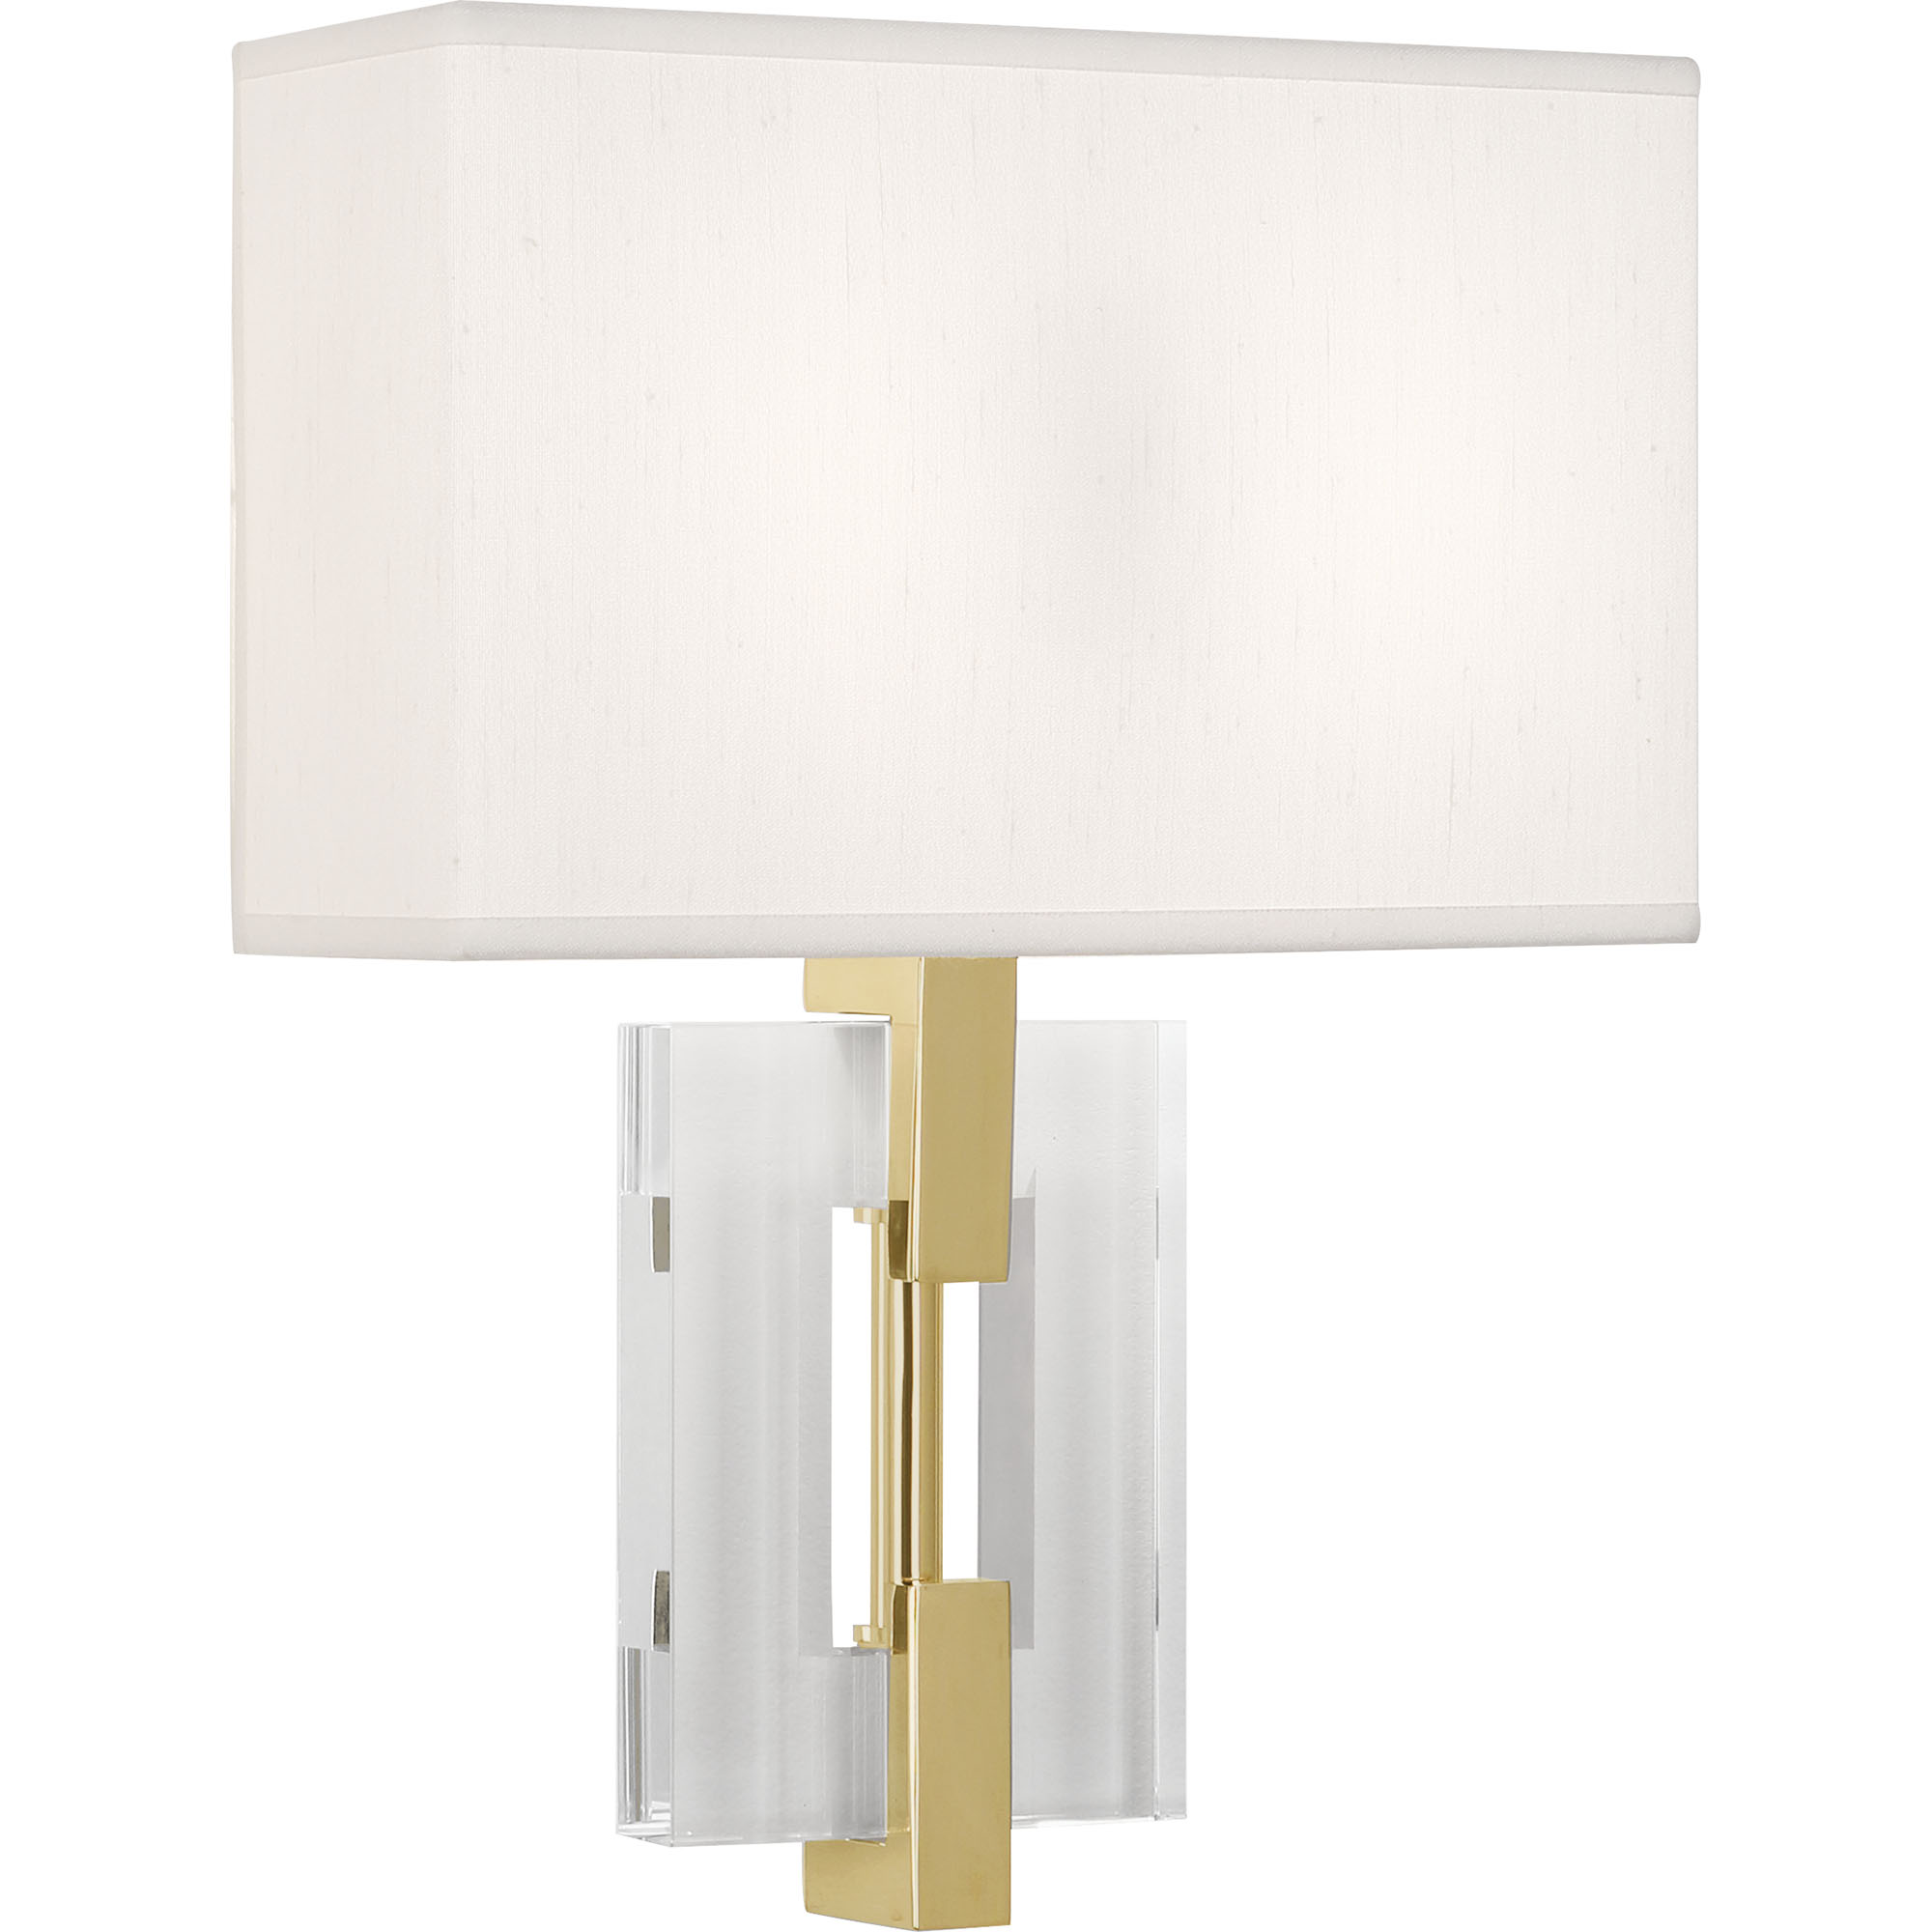 Lincoln Wall Sconce Style #1009